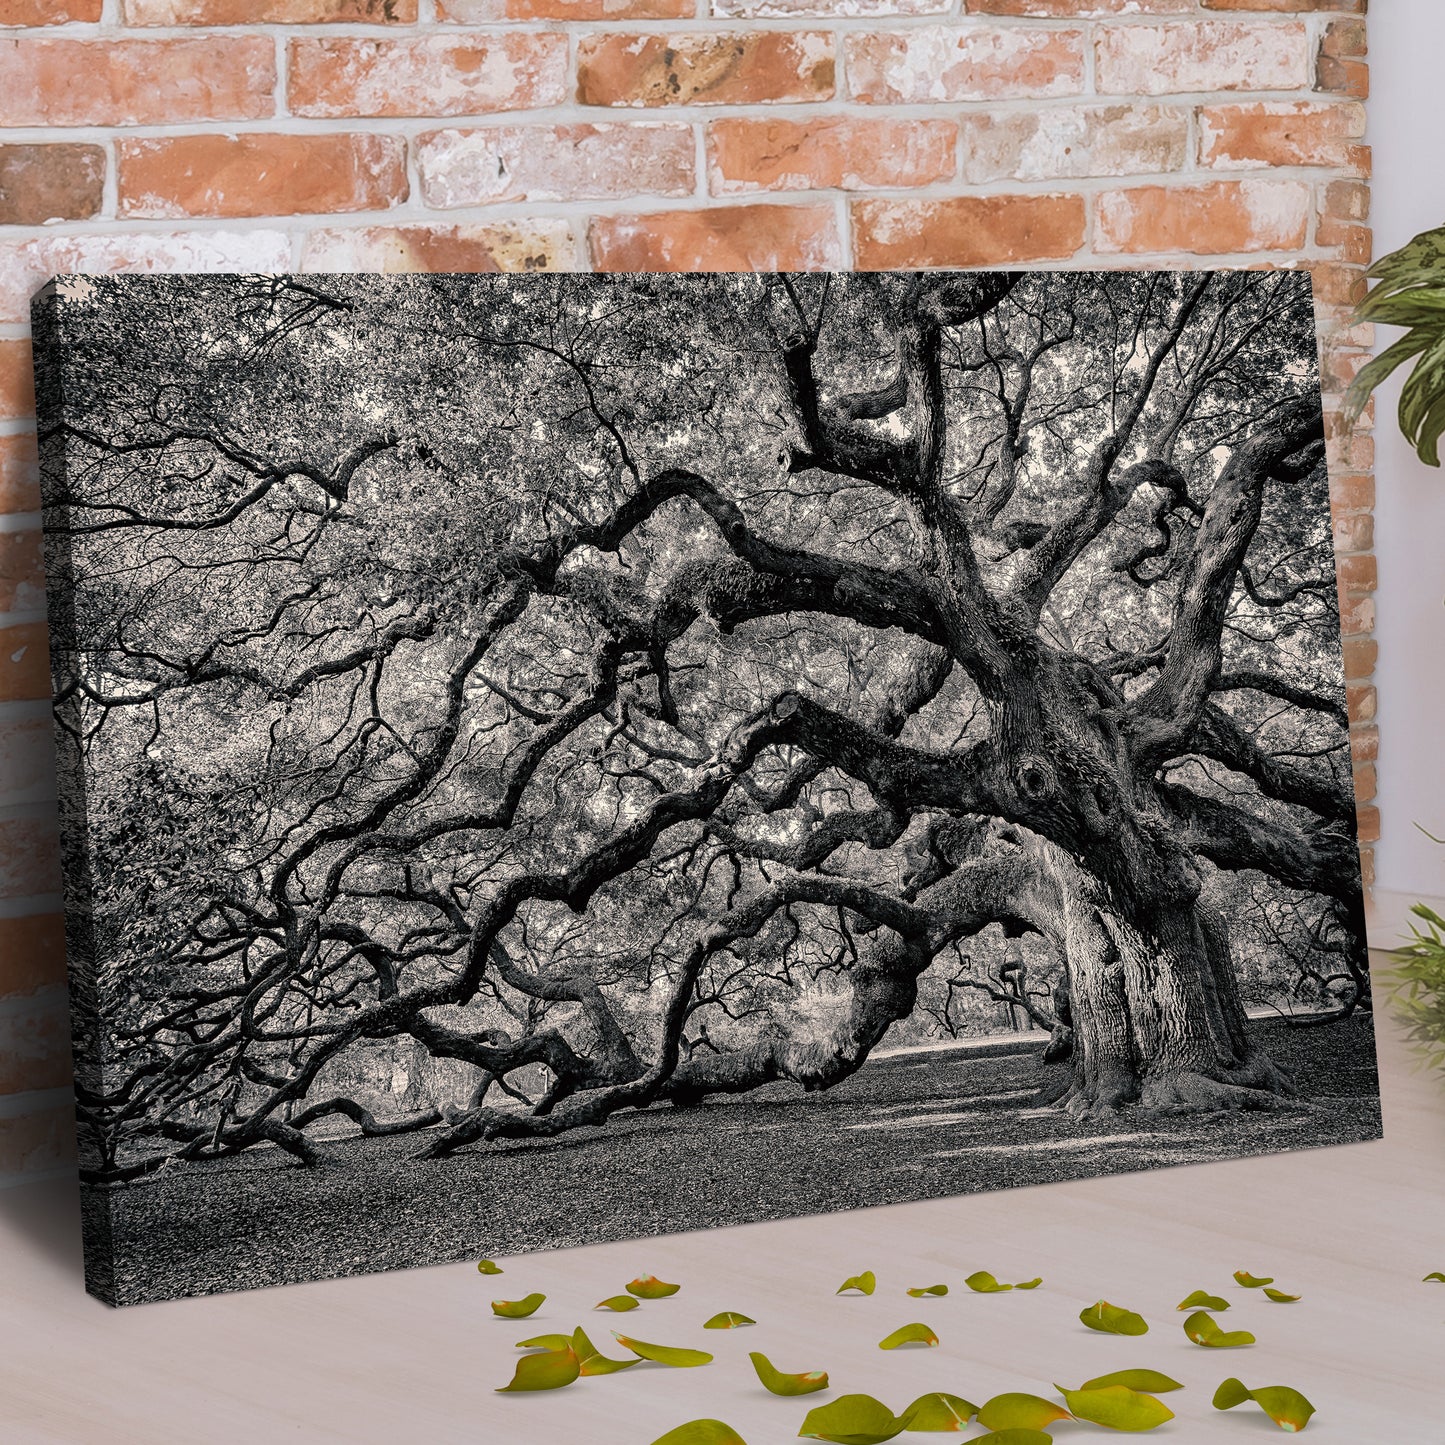 Monochrome Angel Oak Tree Canvas Wall Art Style 1 - Image by Tailored Canvases